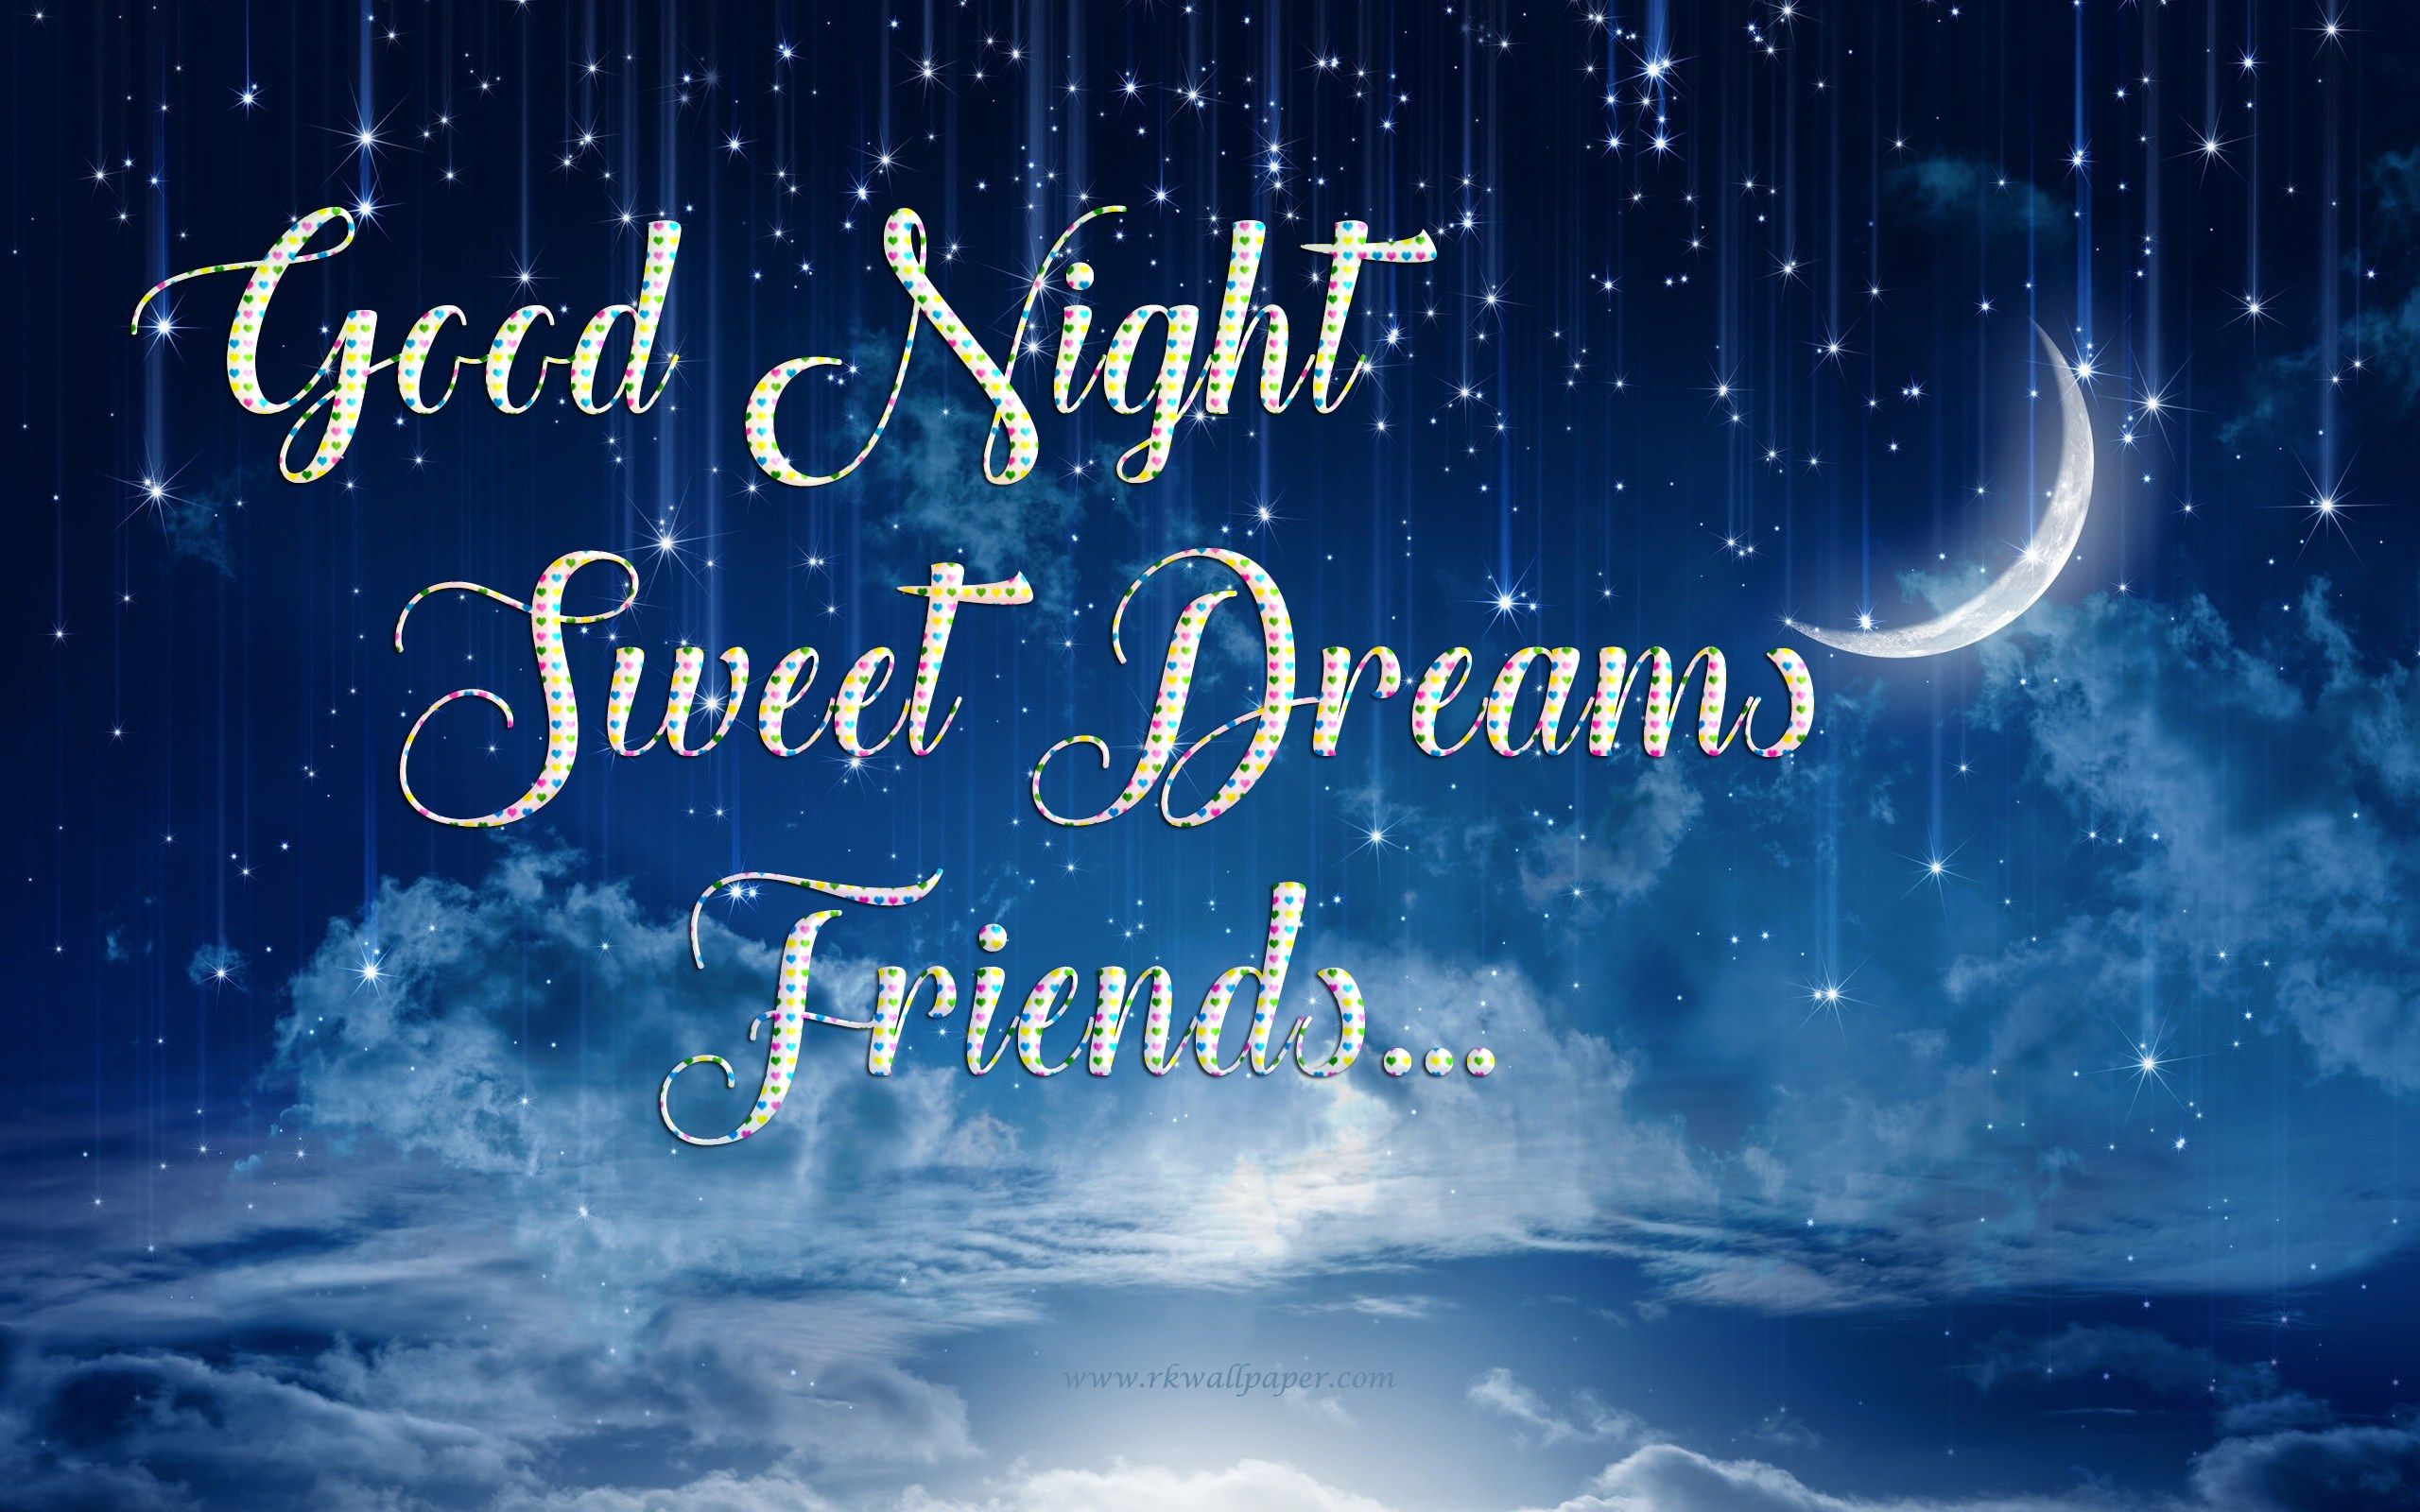 Good Night Images, Photos, Pics & Hd Wallpapers Download - Good Night Friends Sweet Dreams , HD Wallpaper & Backgrounds